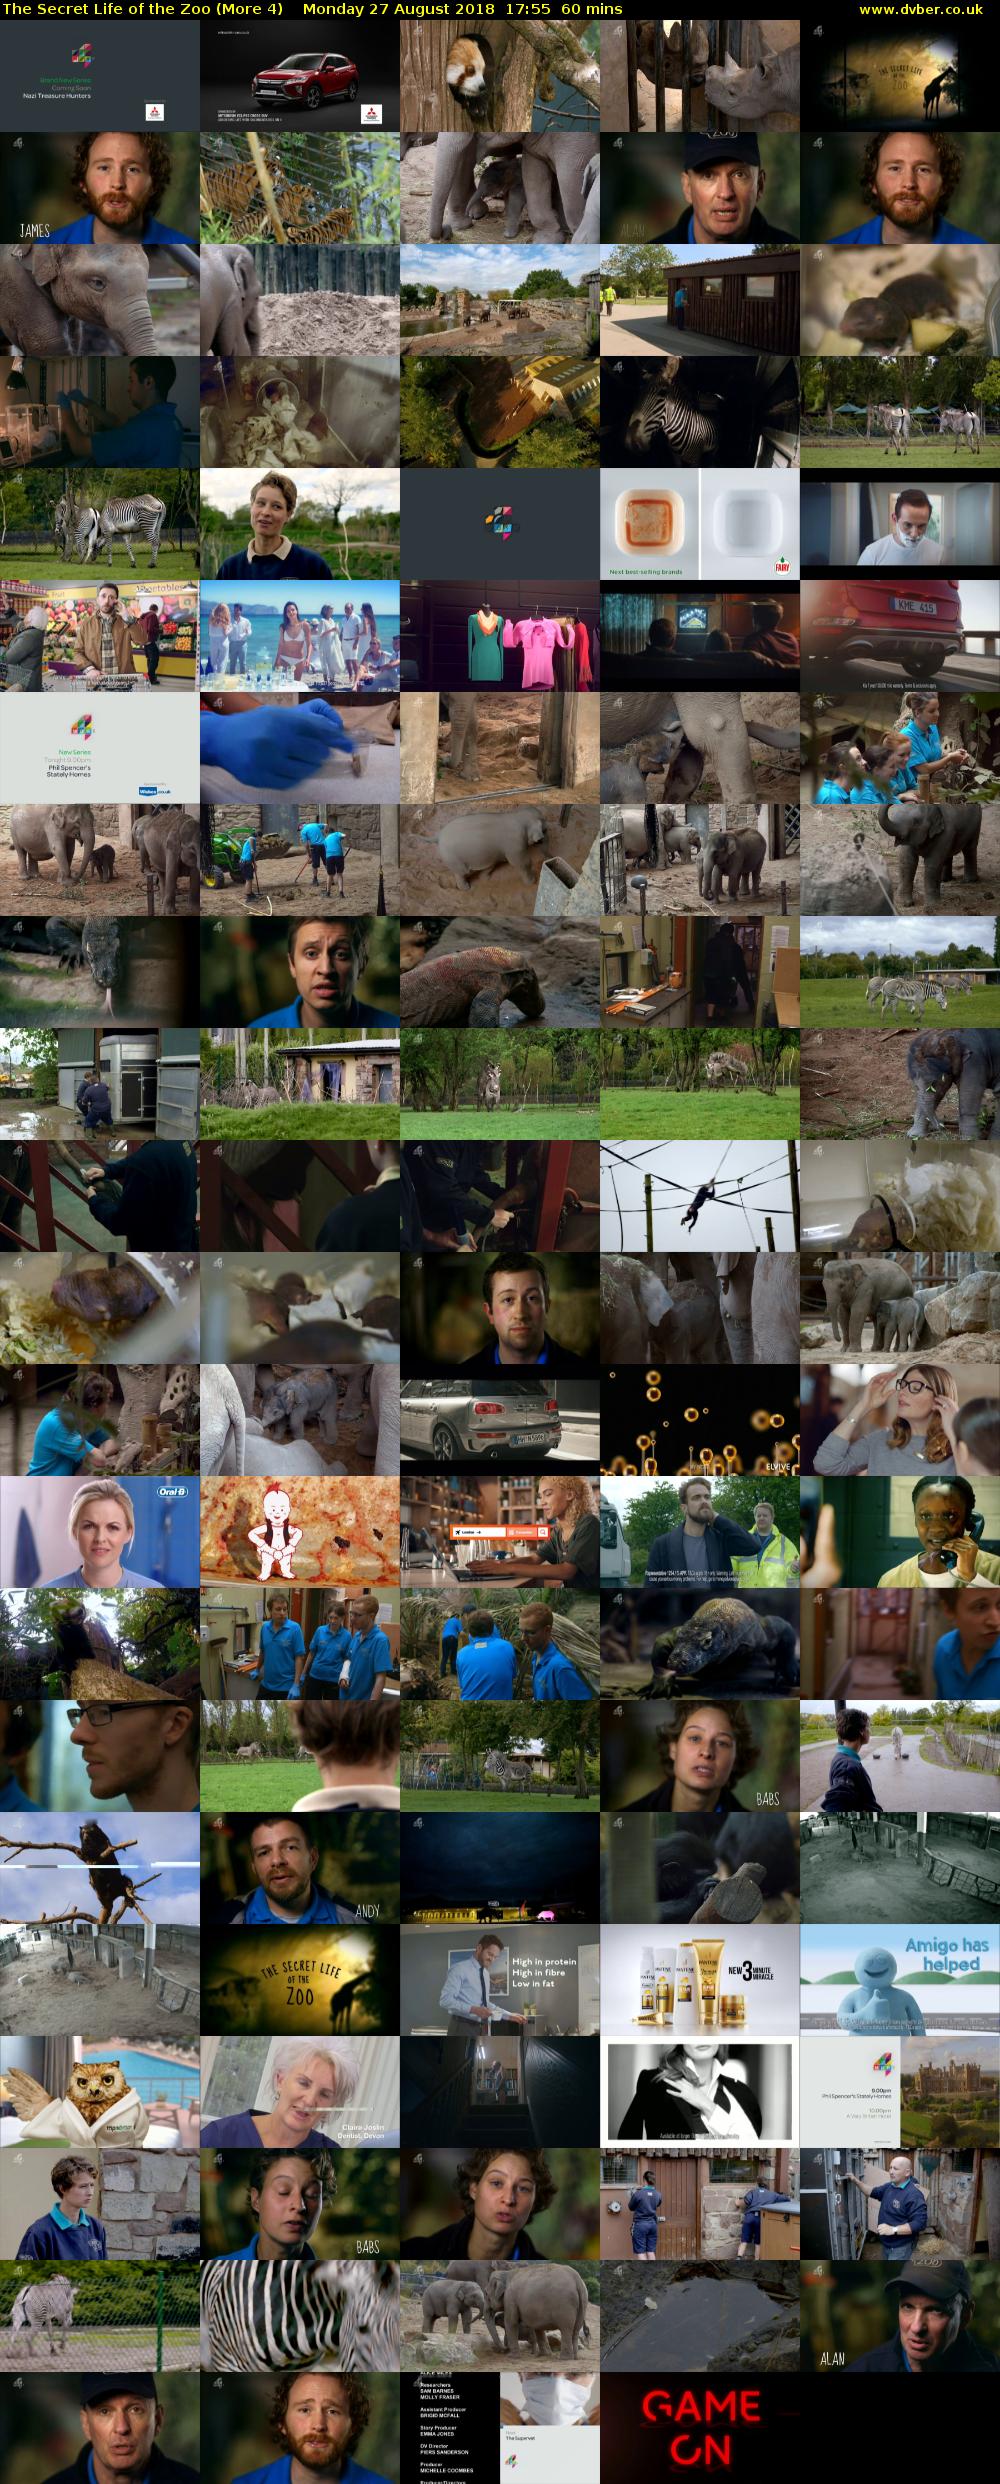 The Secret Life of the Zoo (More 4) Monday 27 August 2018 17:55 - 18:55